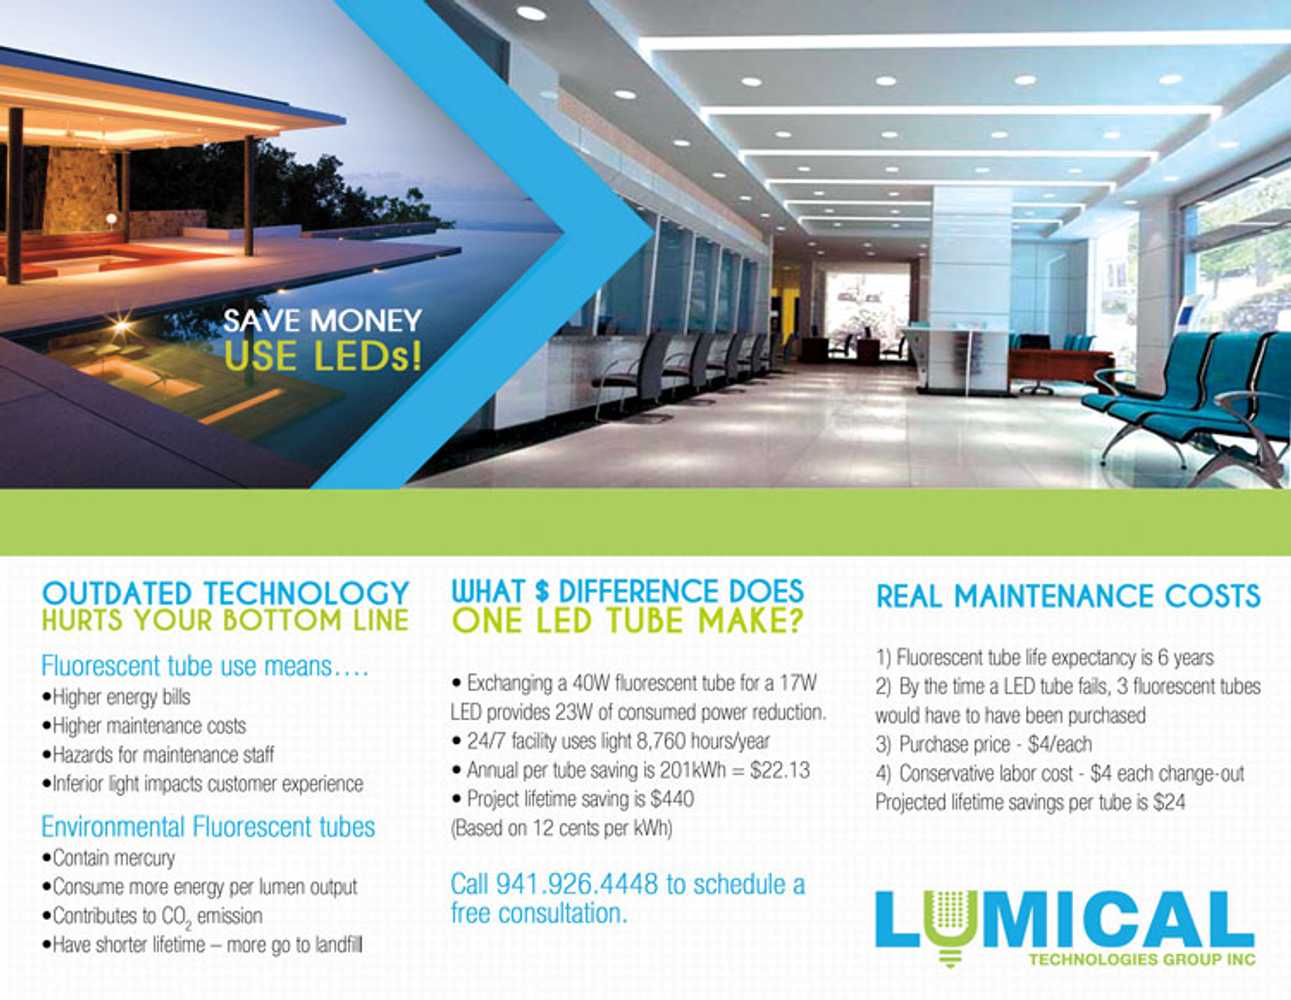 Projects by Lumical Technologies Group